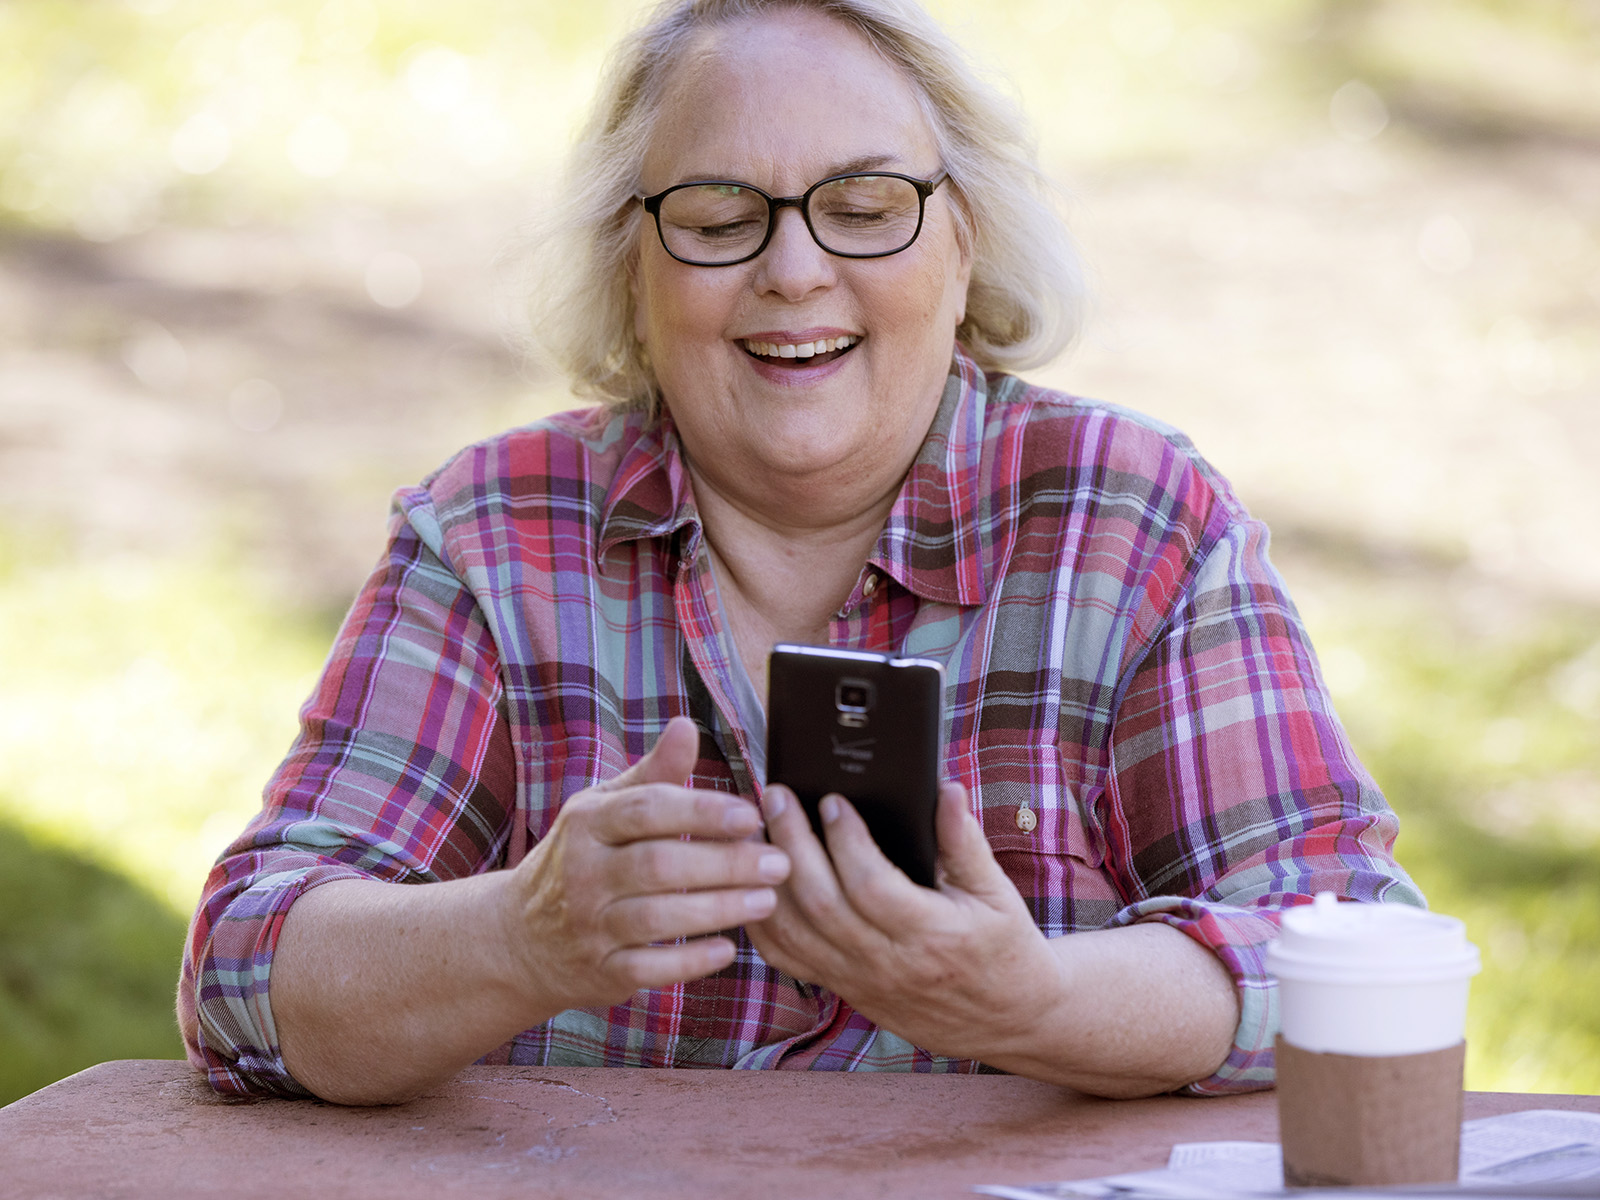 A woman laughs at something on her phone while sitting in the park.